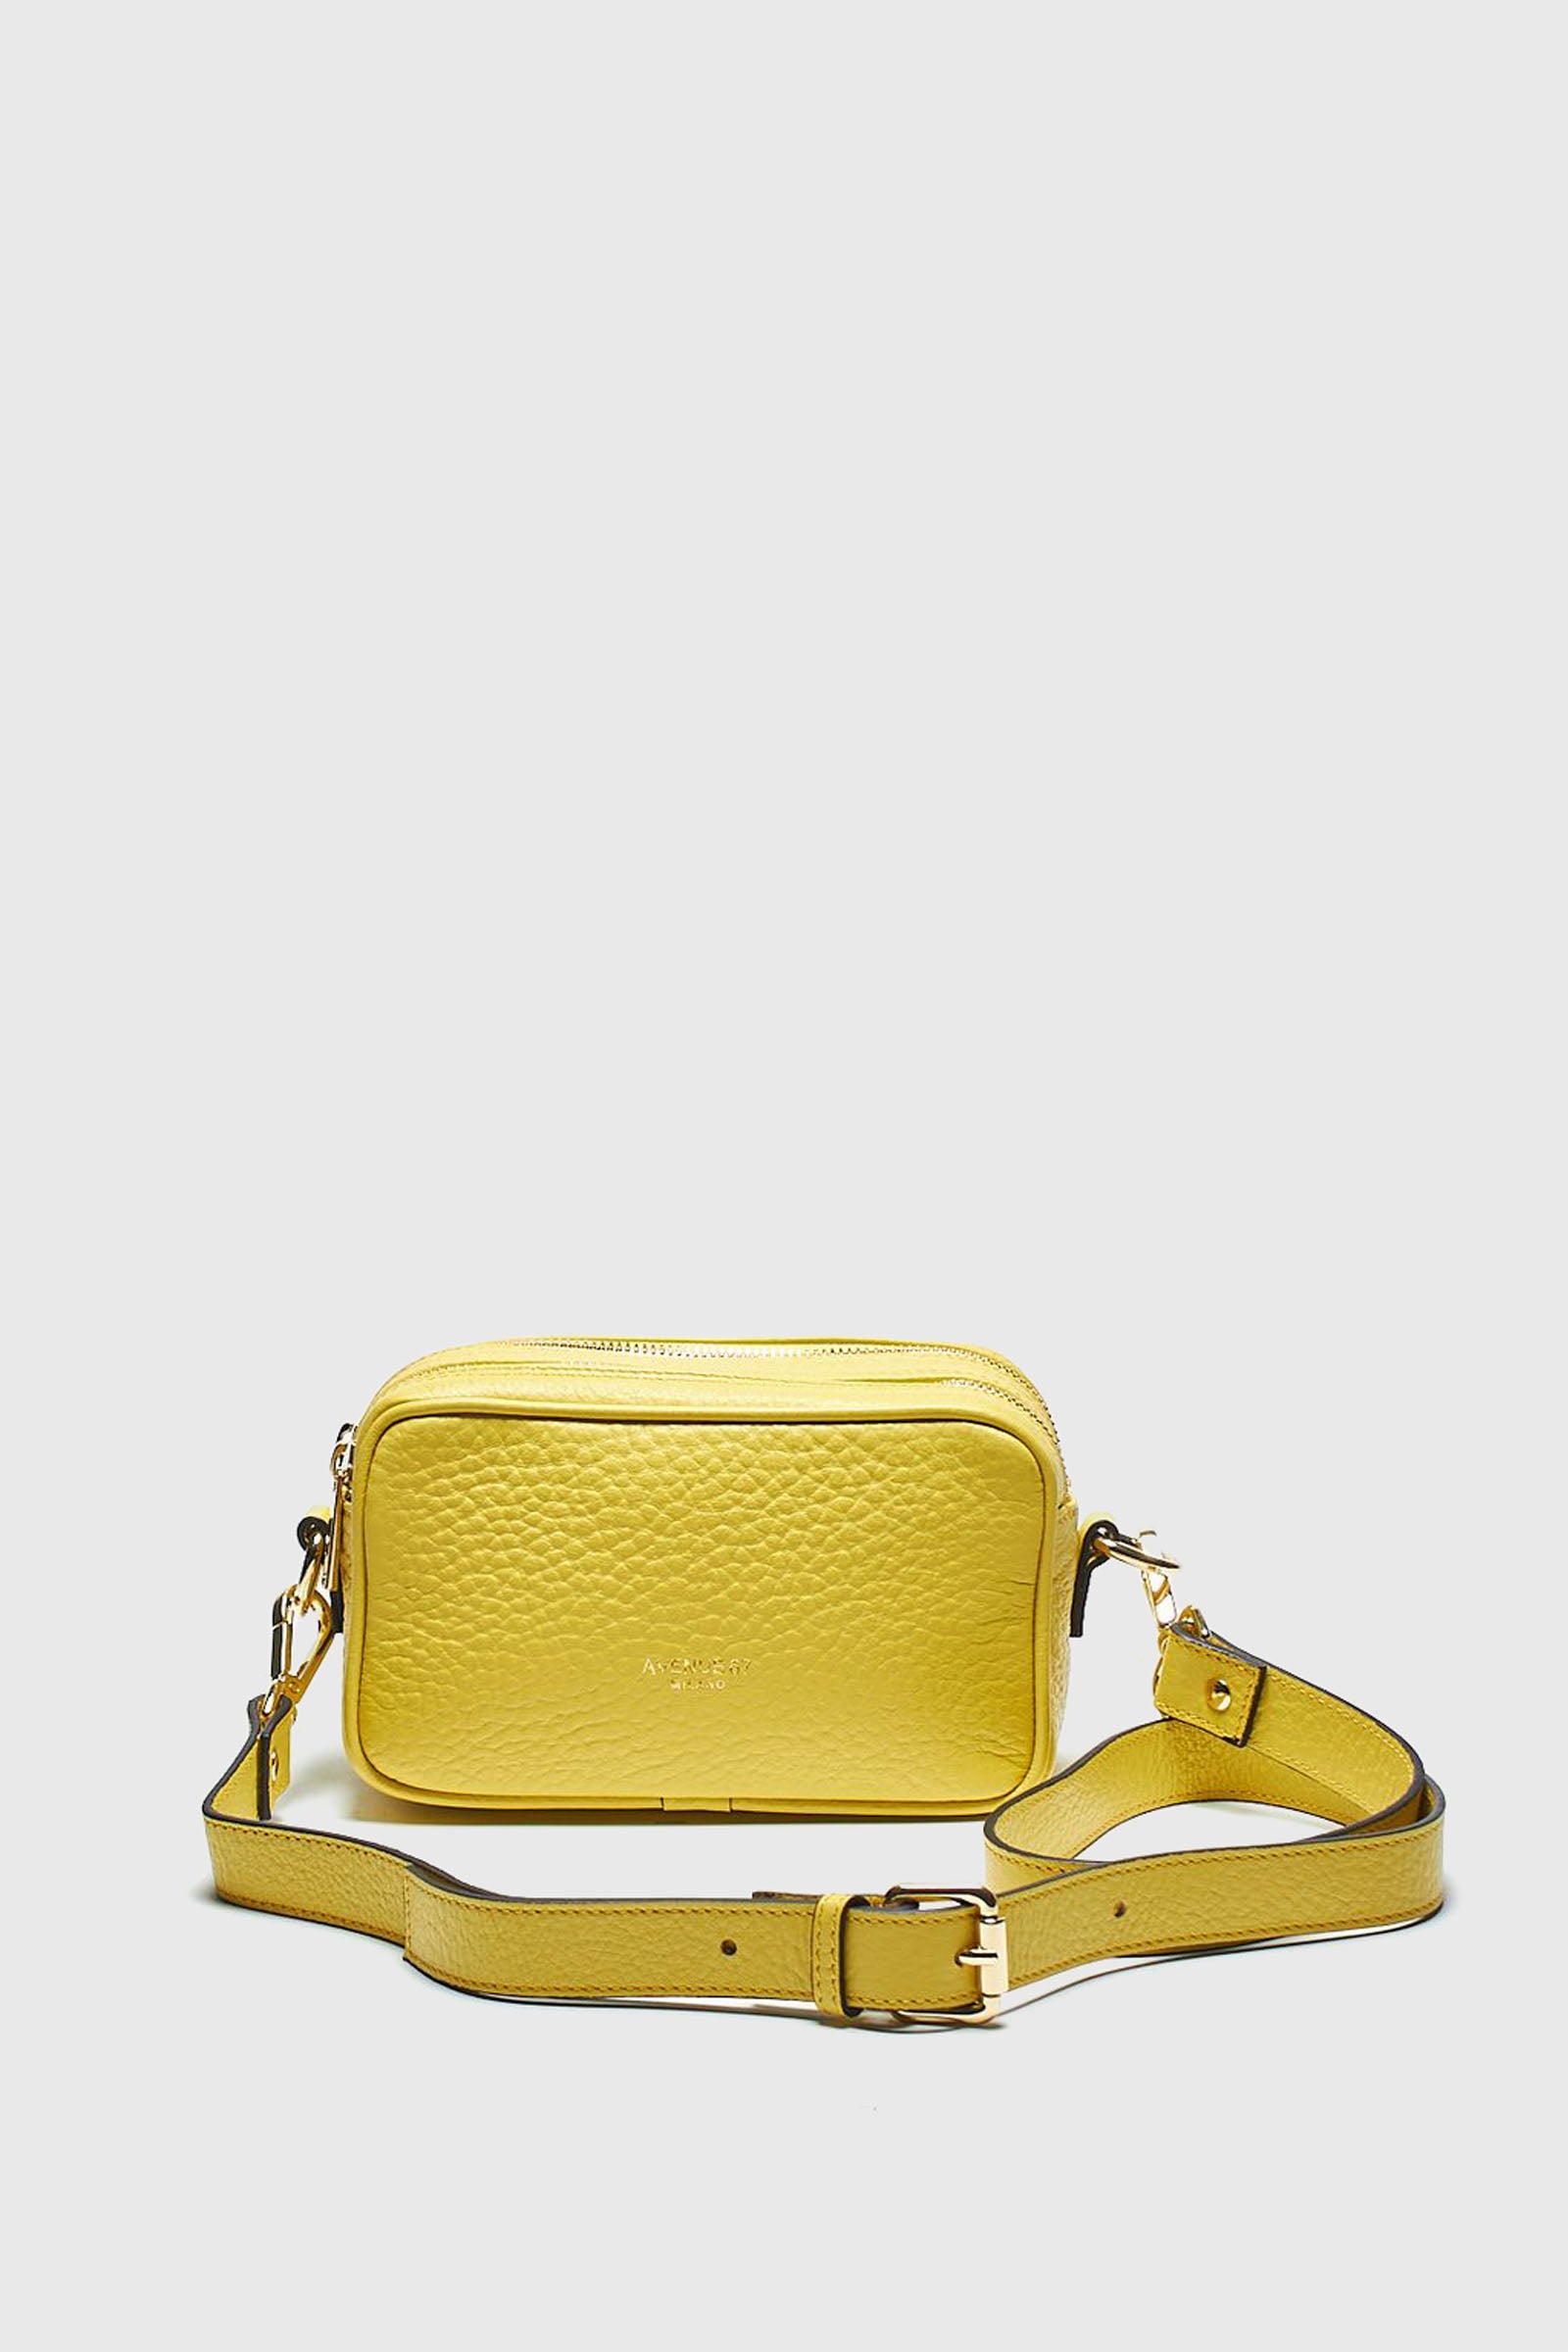 Avenue 67 Gabrielle Leather Bag Yellow - 1